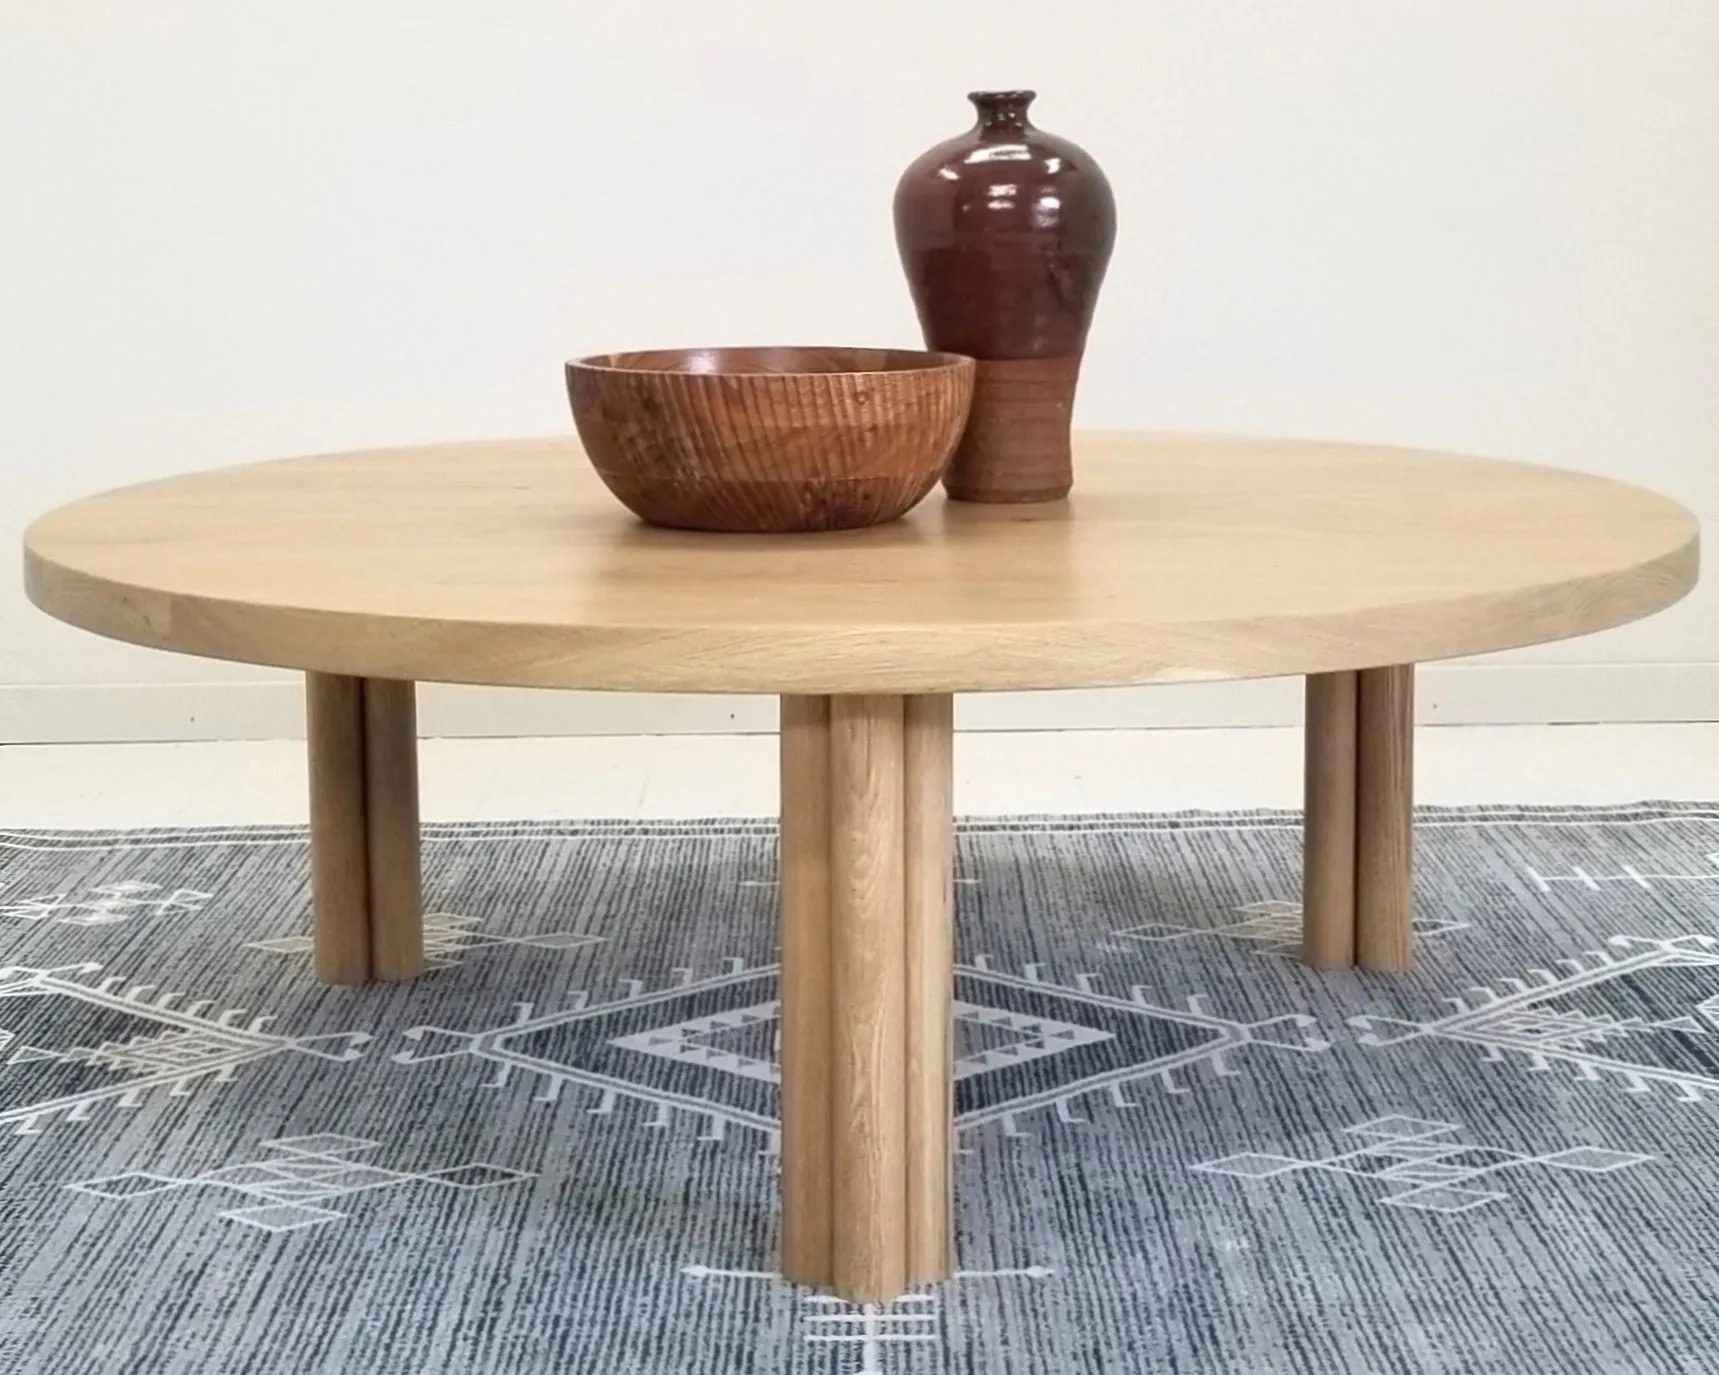 A wooden round coffee table with two vases on top of it.